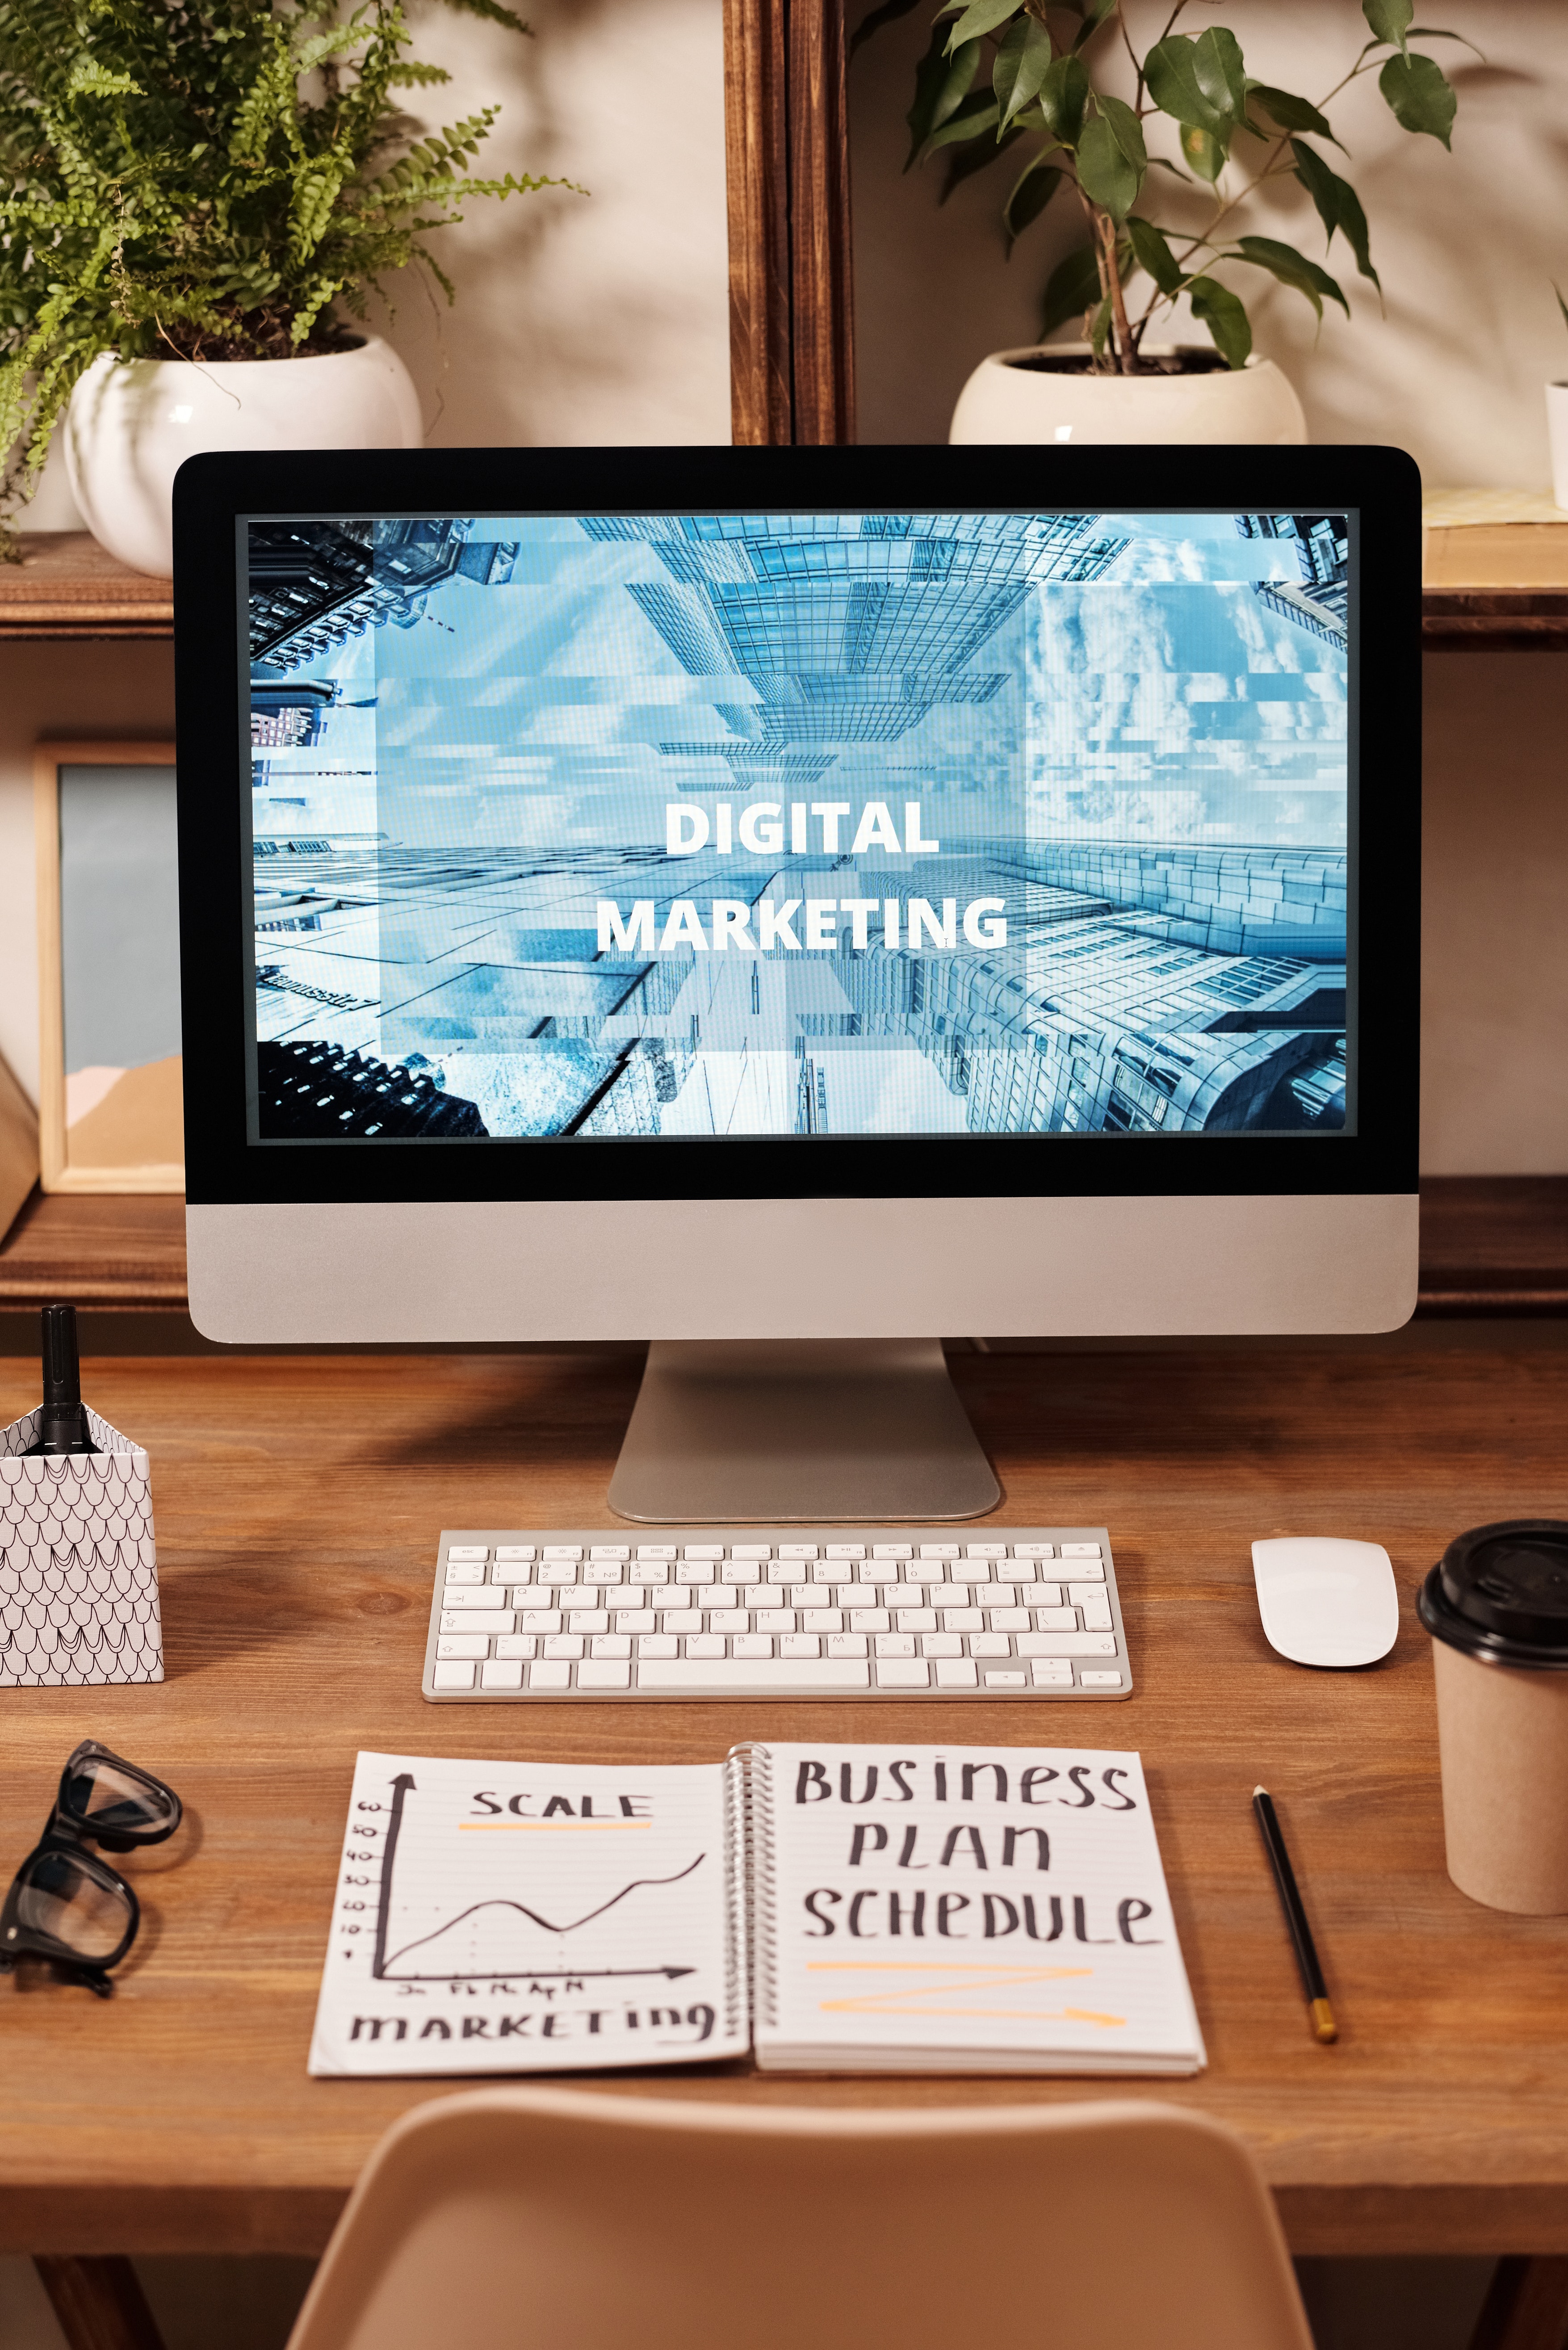 6 Technologies That Will Benefit Your Digital Marketing Campaigns